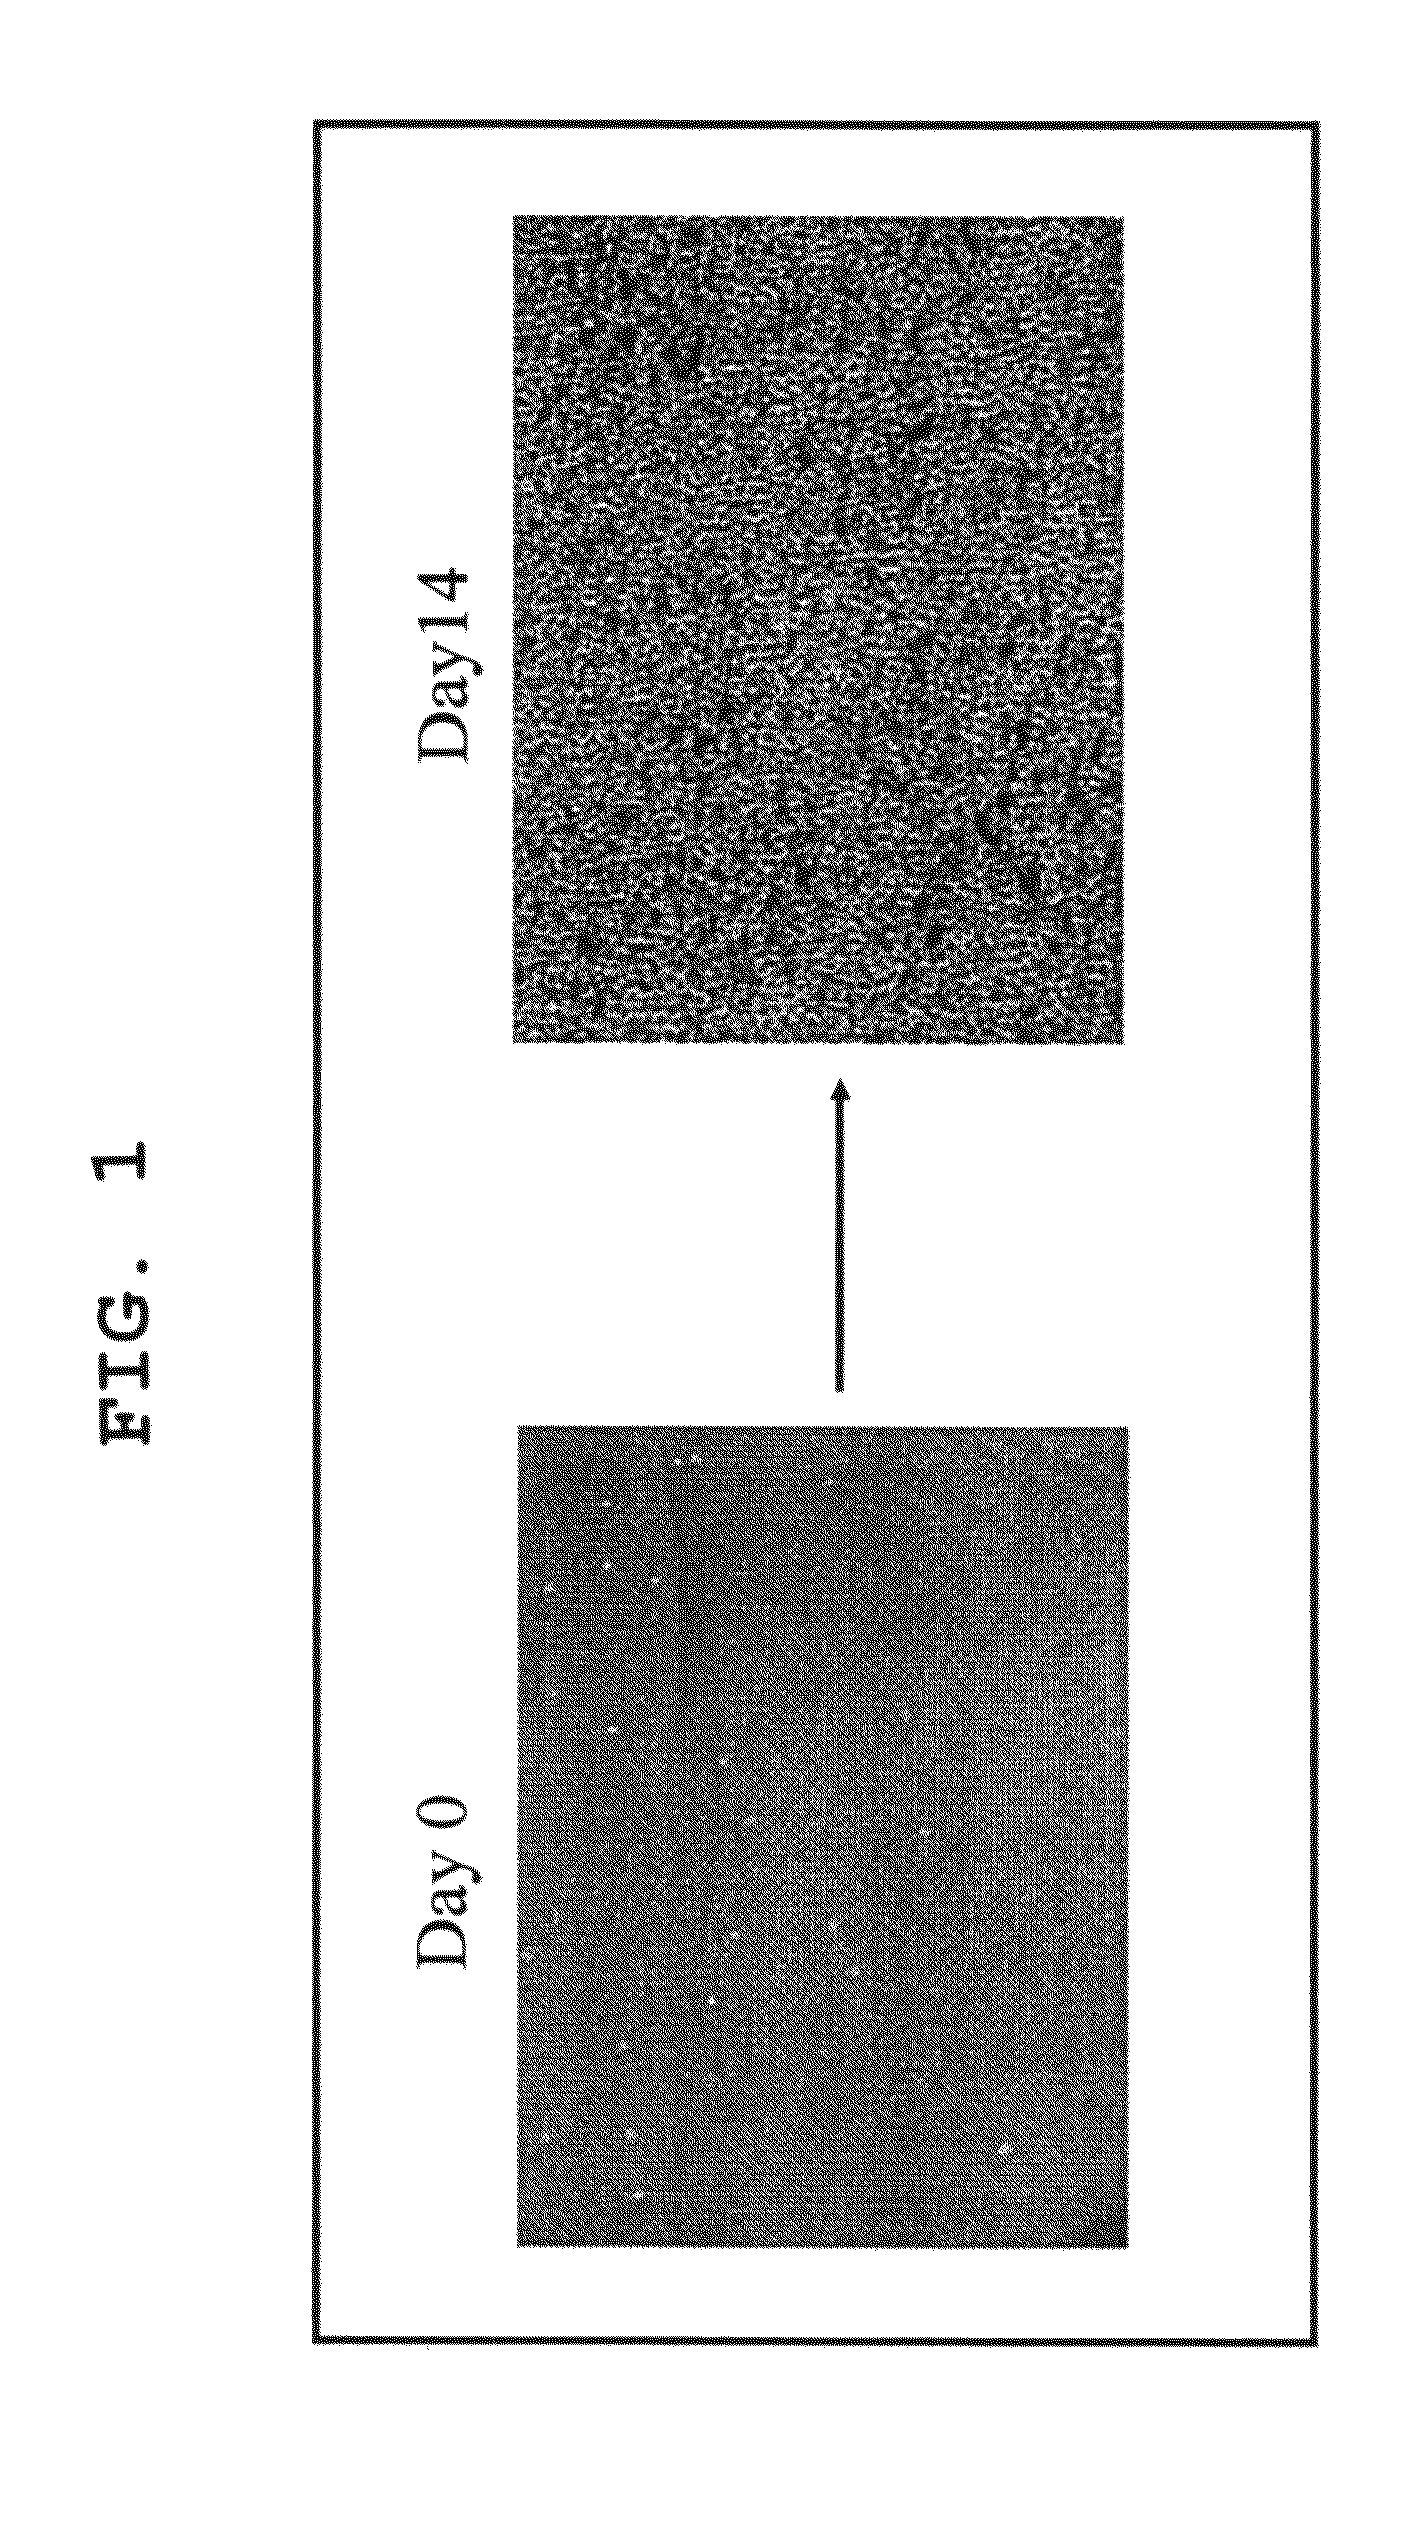 Method for amplification of endothelial progenitor cell in vitro